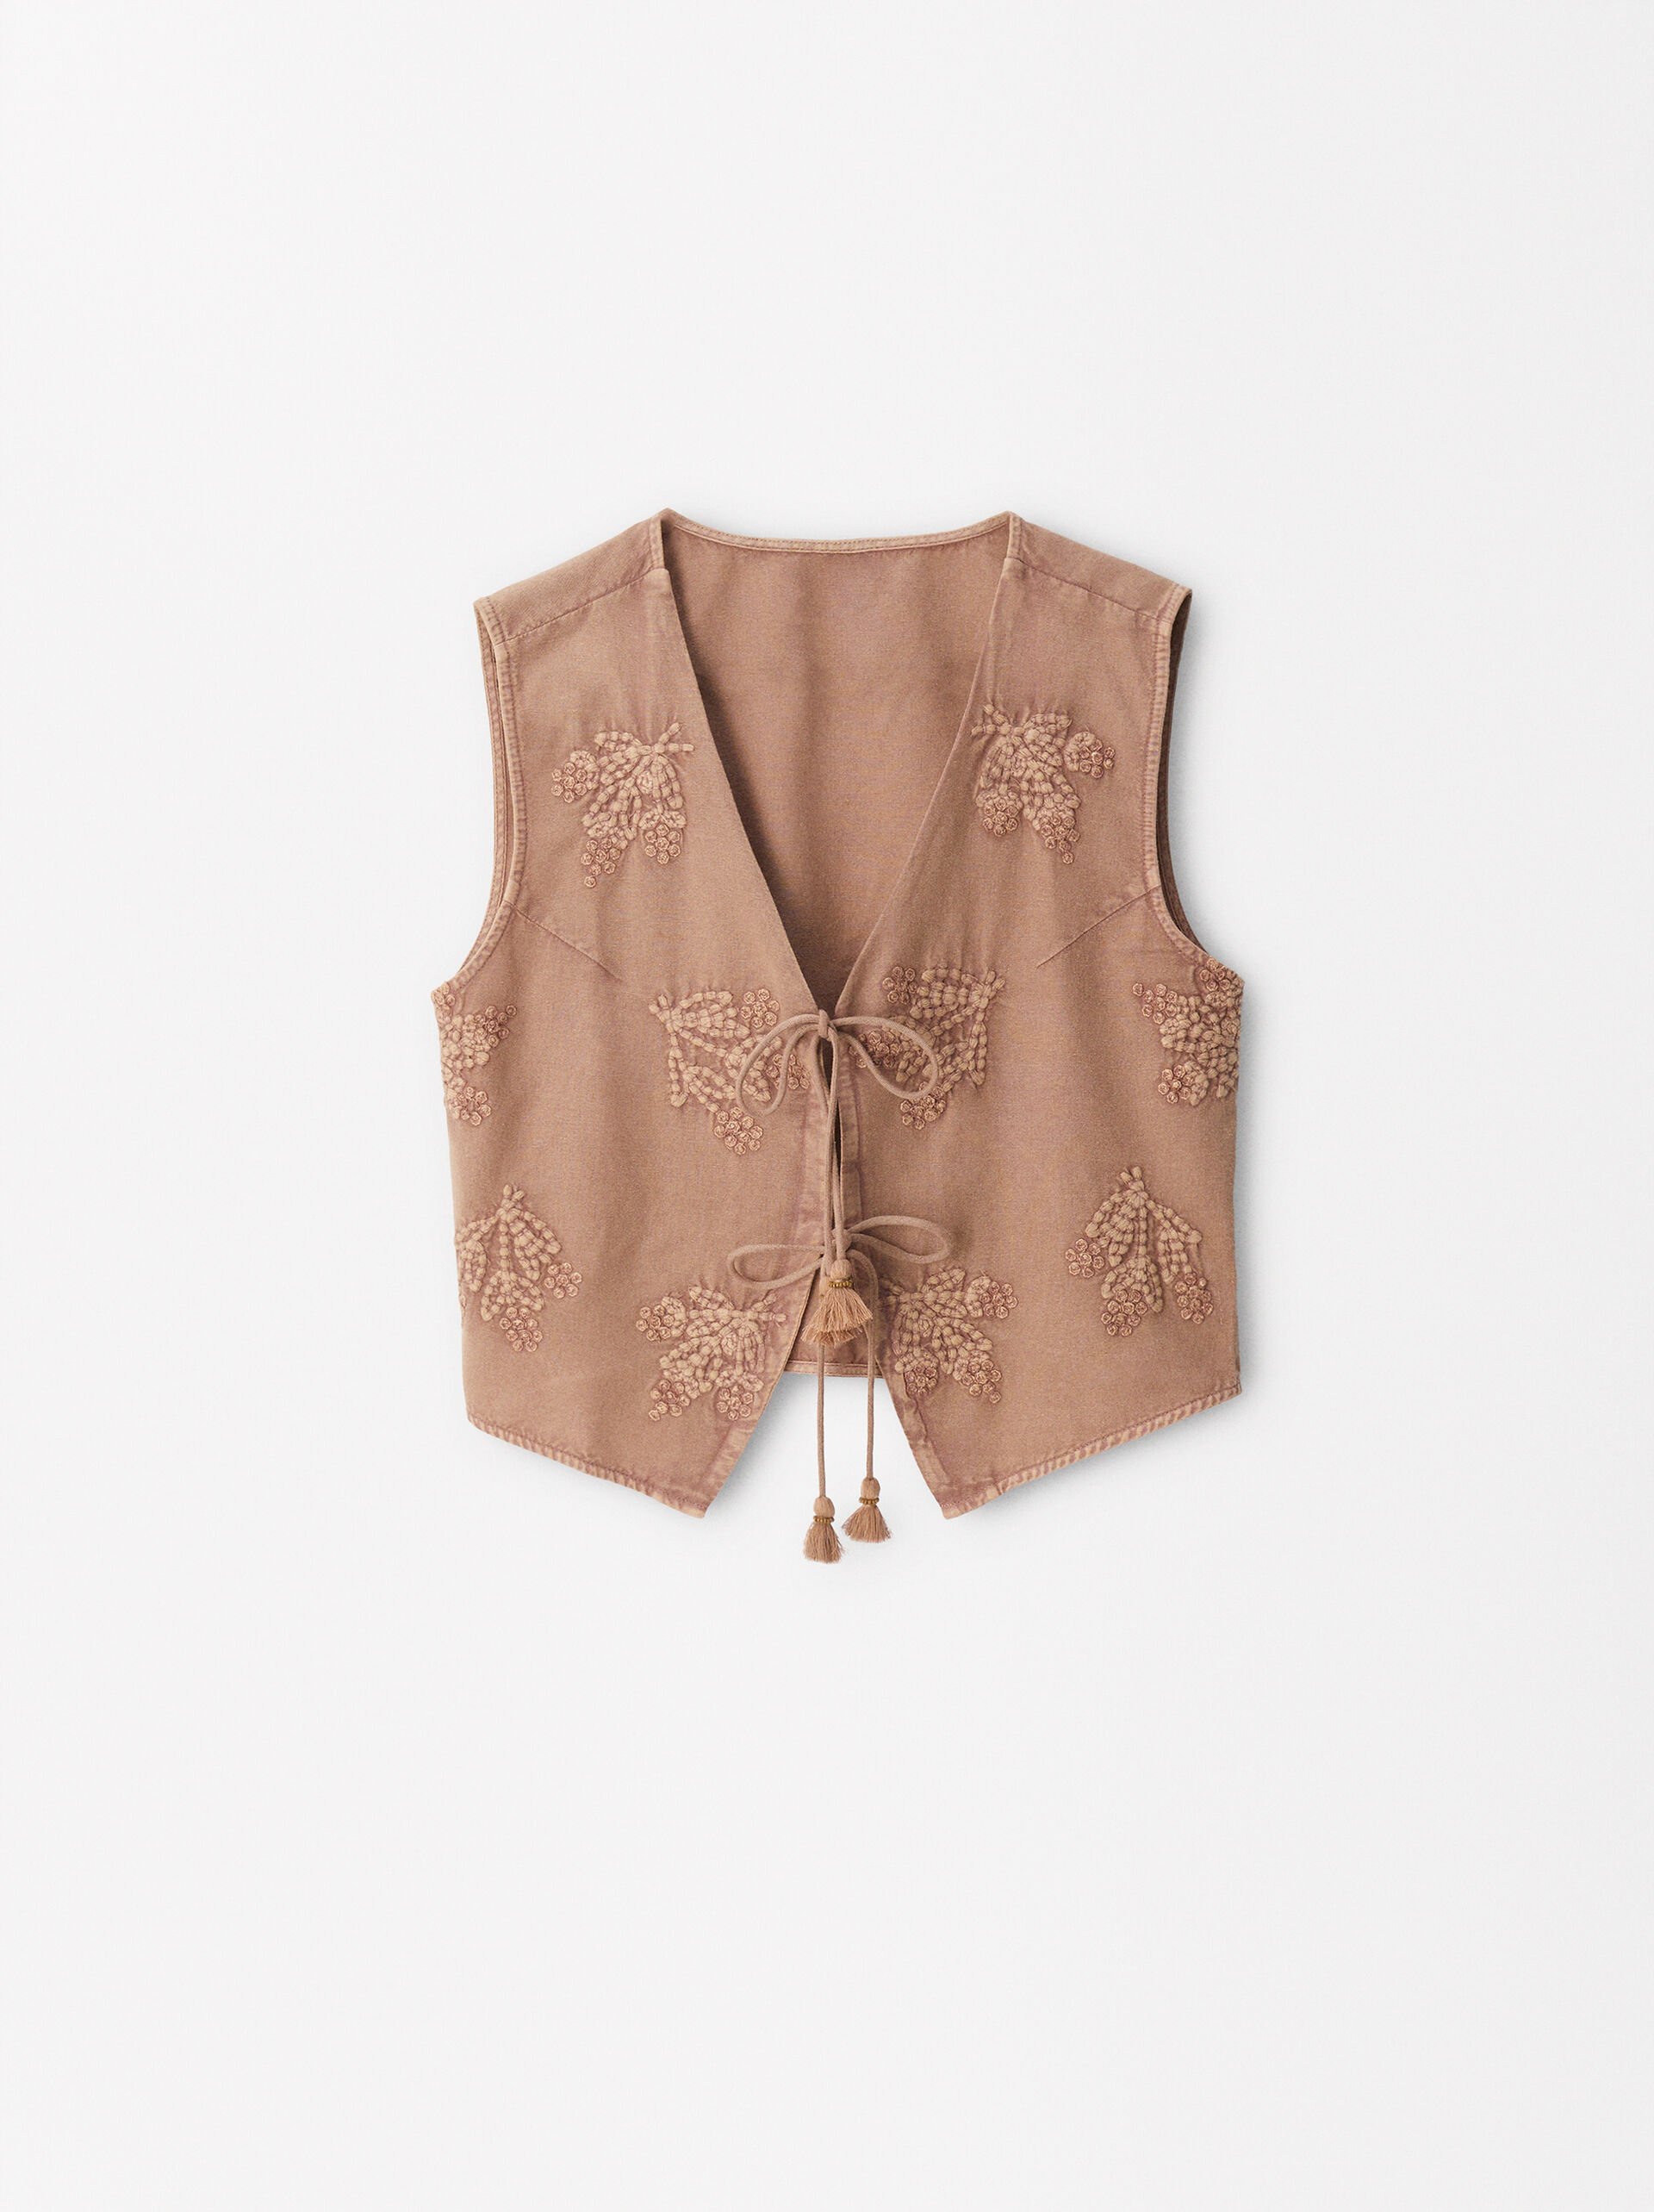 Embroidered Vest With Bows image number 1.0